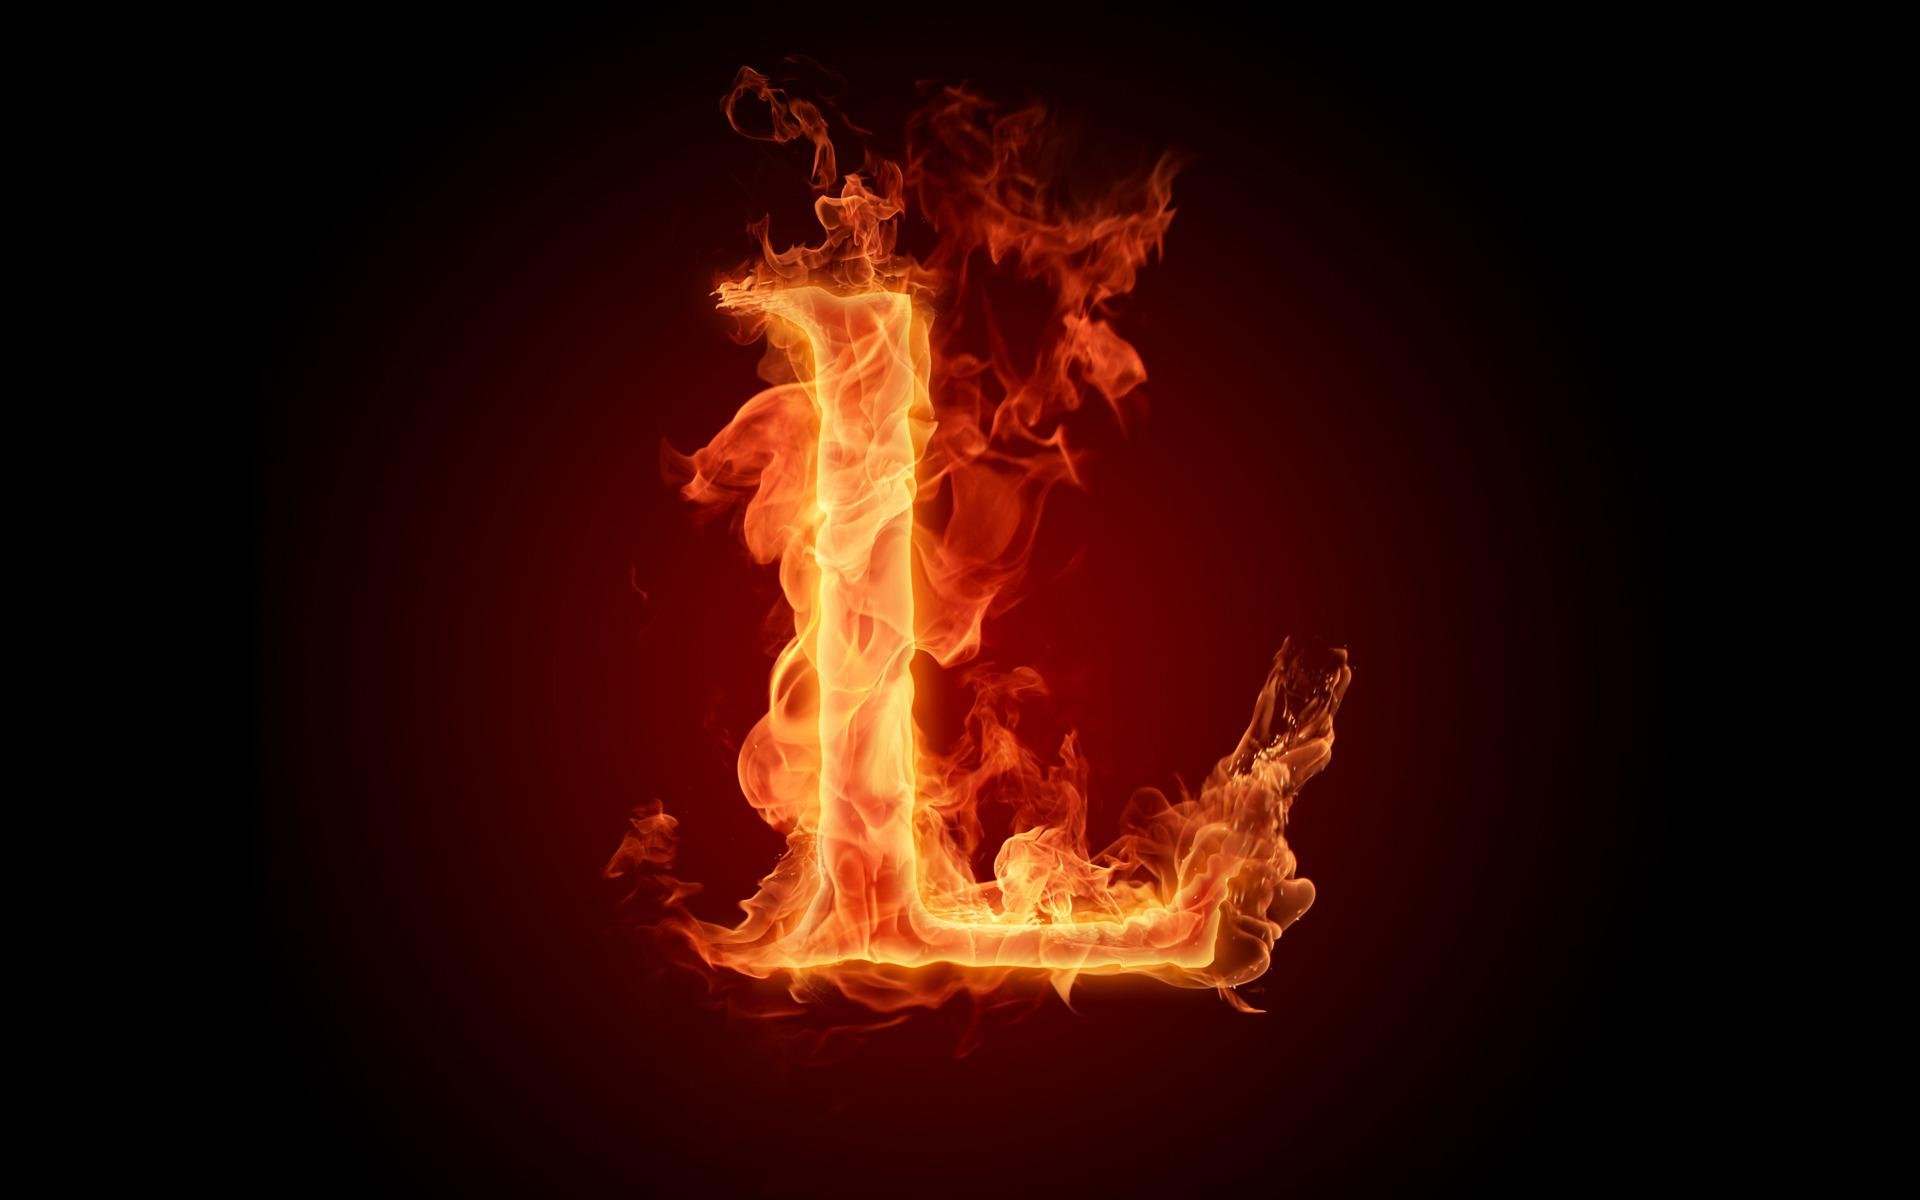 the fiery english alphabet picture l, 1920x1200 Wallpaper